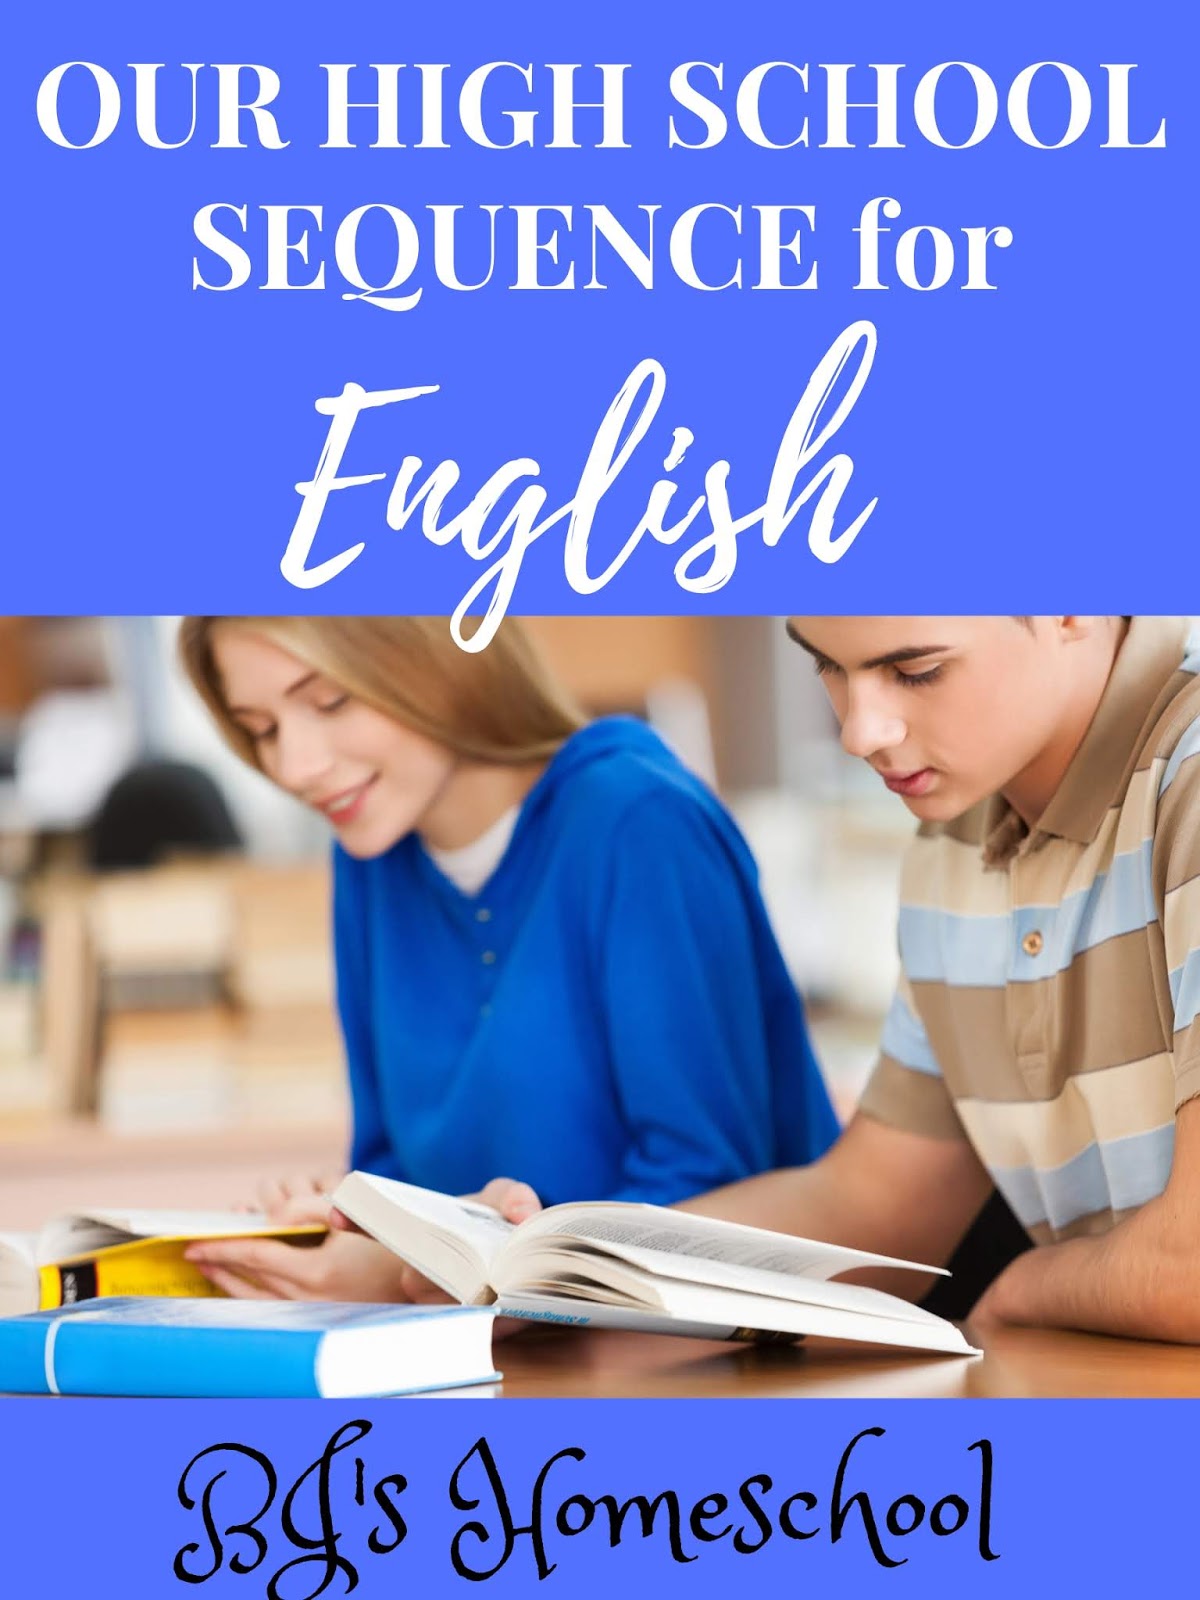 bj-s-homeschool-our-homeschool-high-school-english-sequence-and